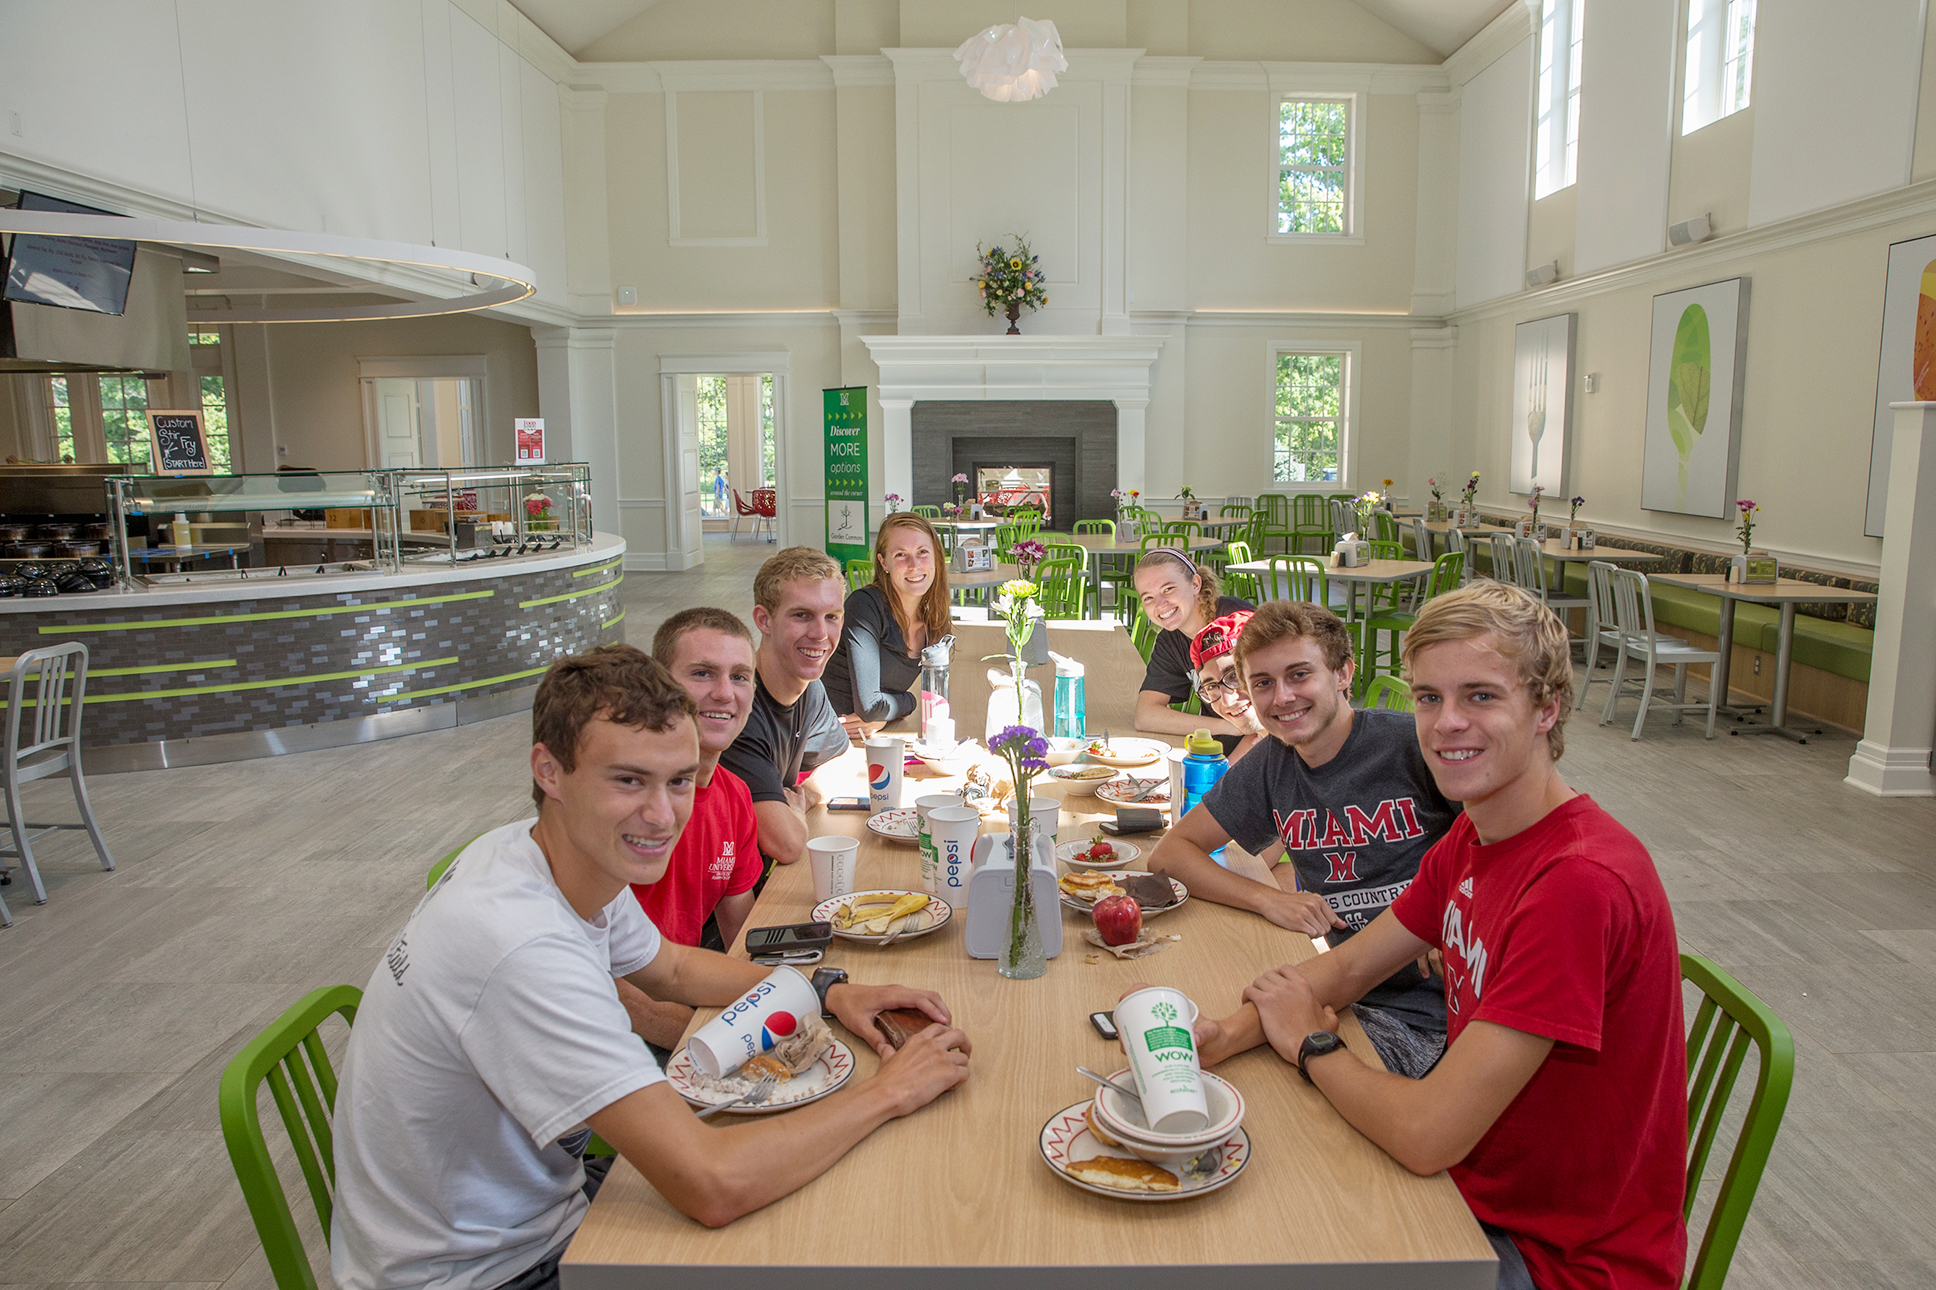 Students sit together at a wooden table at a new dining facility